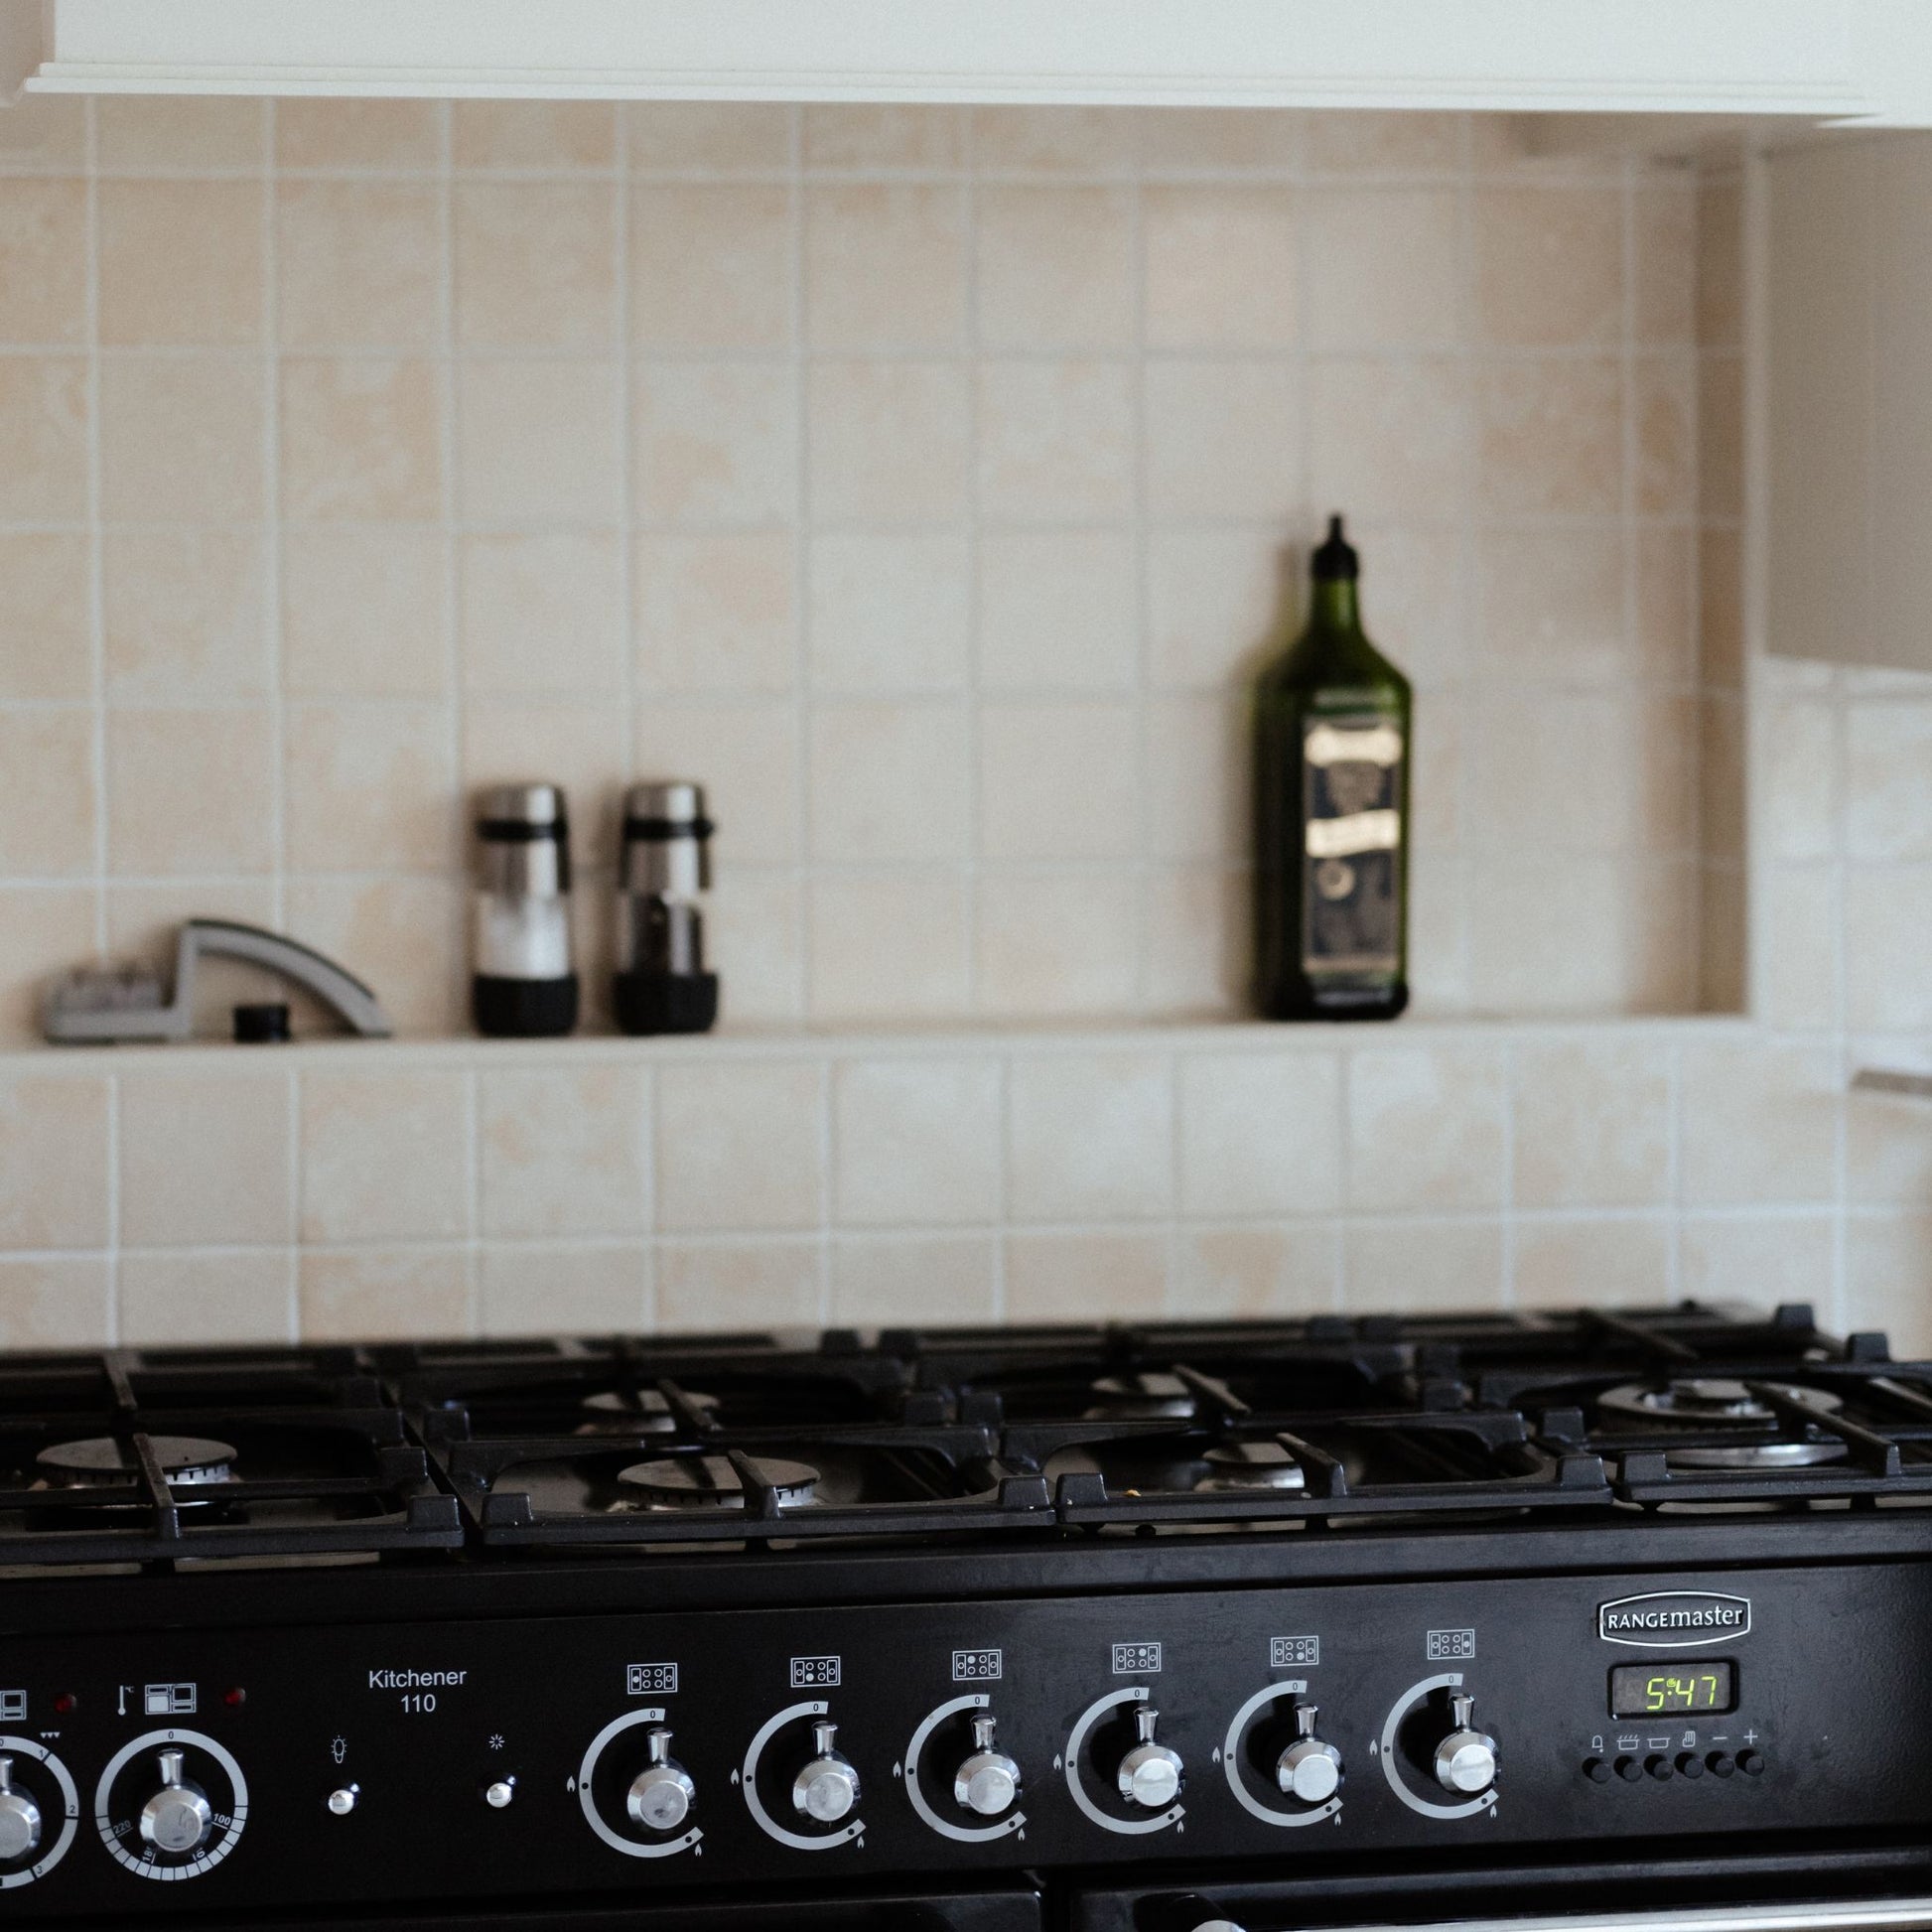 A tiled splashback behind a rangemaster oven in a country kitchen. The splashback is made up of small plain cream marble tiles.